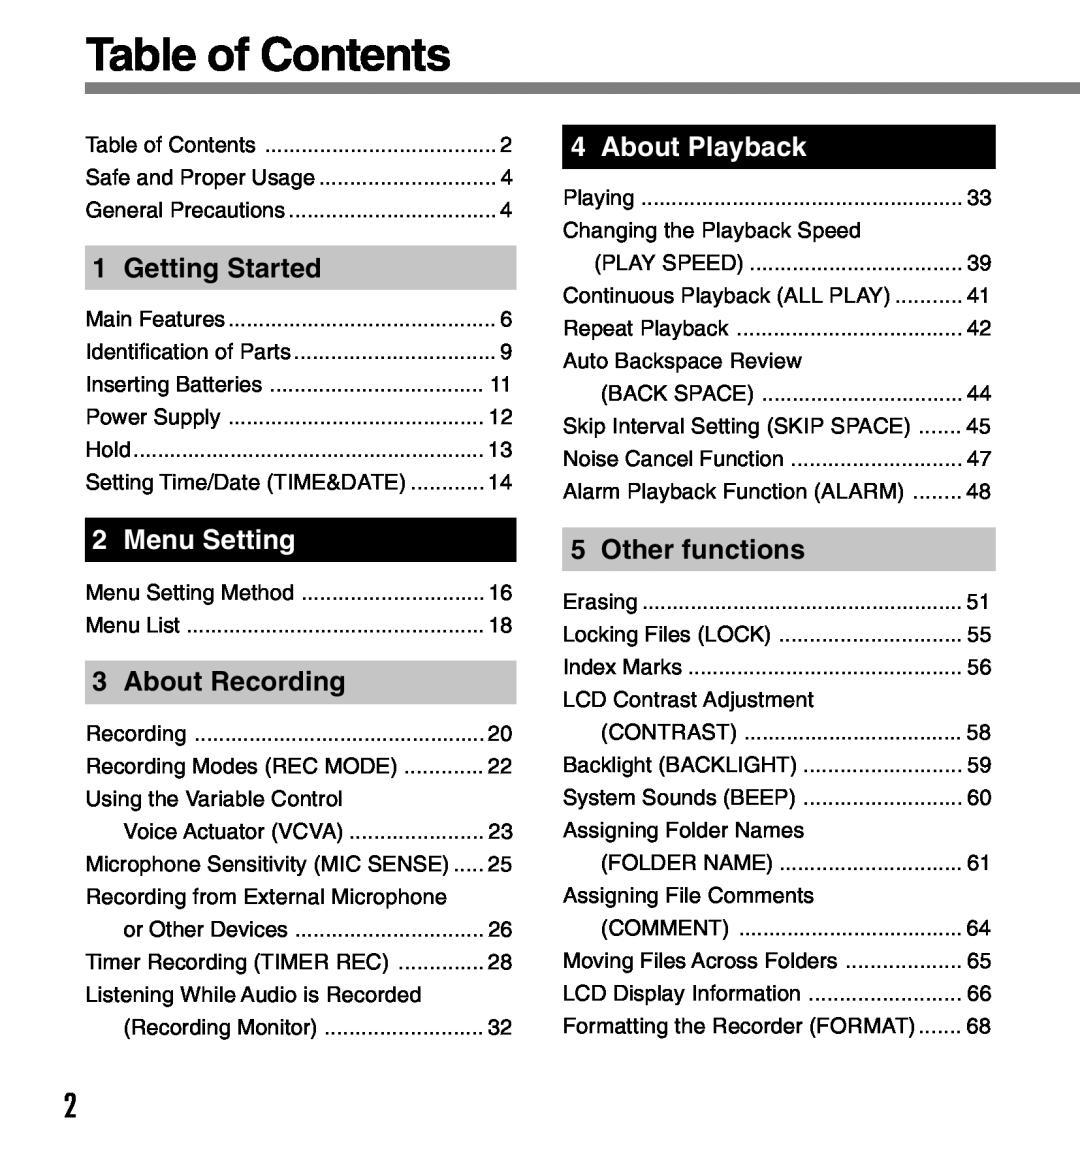 Olympus 2 manual Table of Contents, Getting Started, Menu Setting, About Recording, About Playback, Other functions 